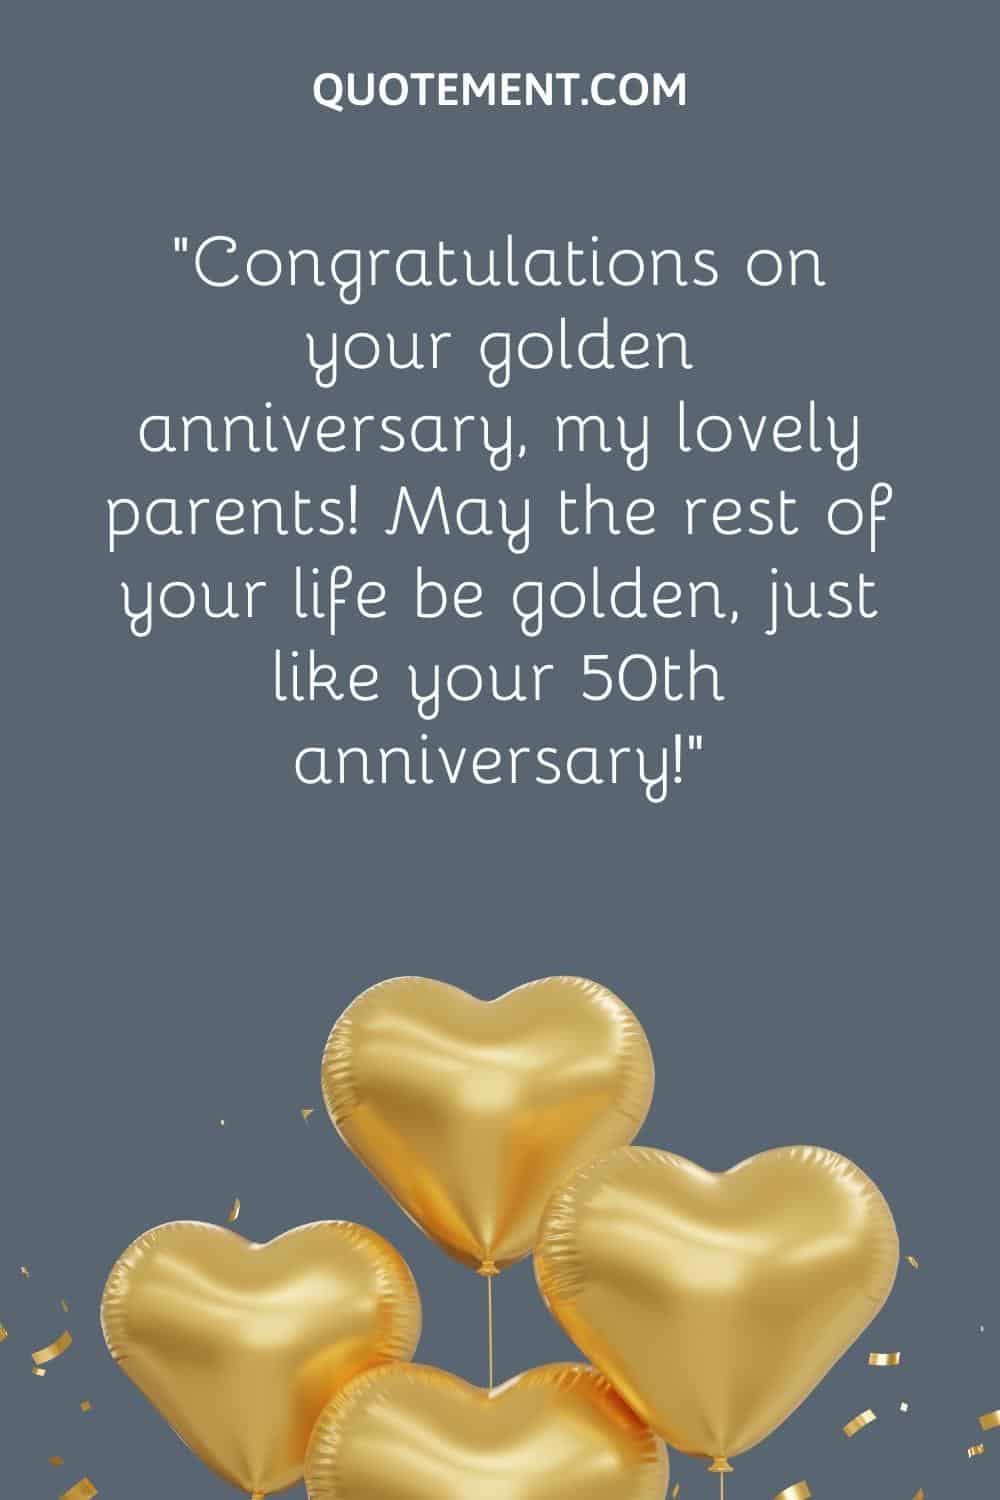 “Congratulations on your golden anniversary, my lovely parents! May the rest of your life be golden, just like your 50th anniversary!”